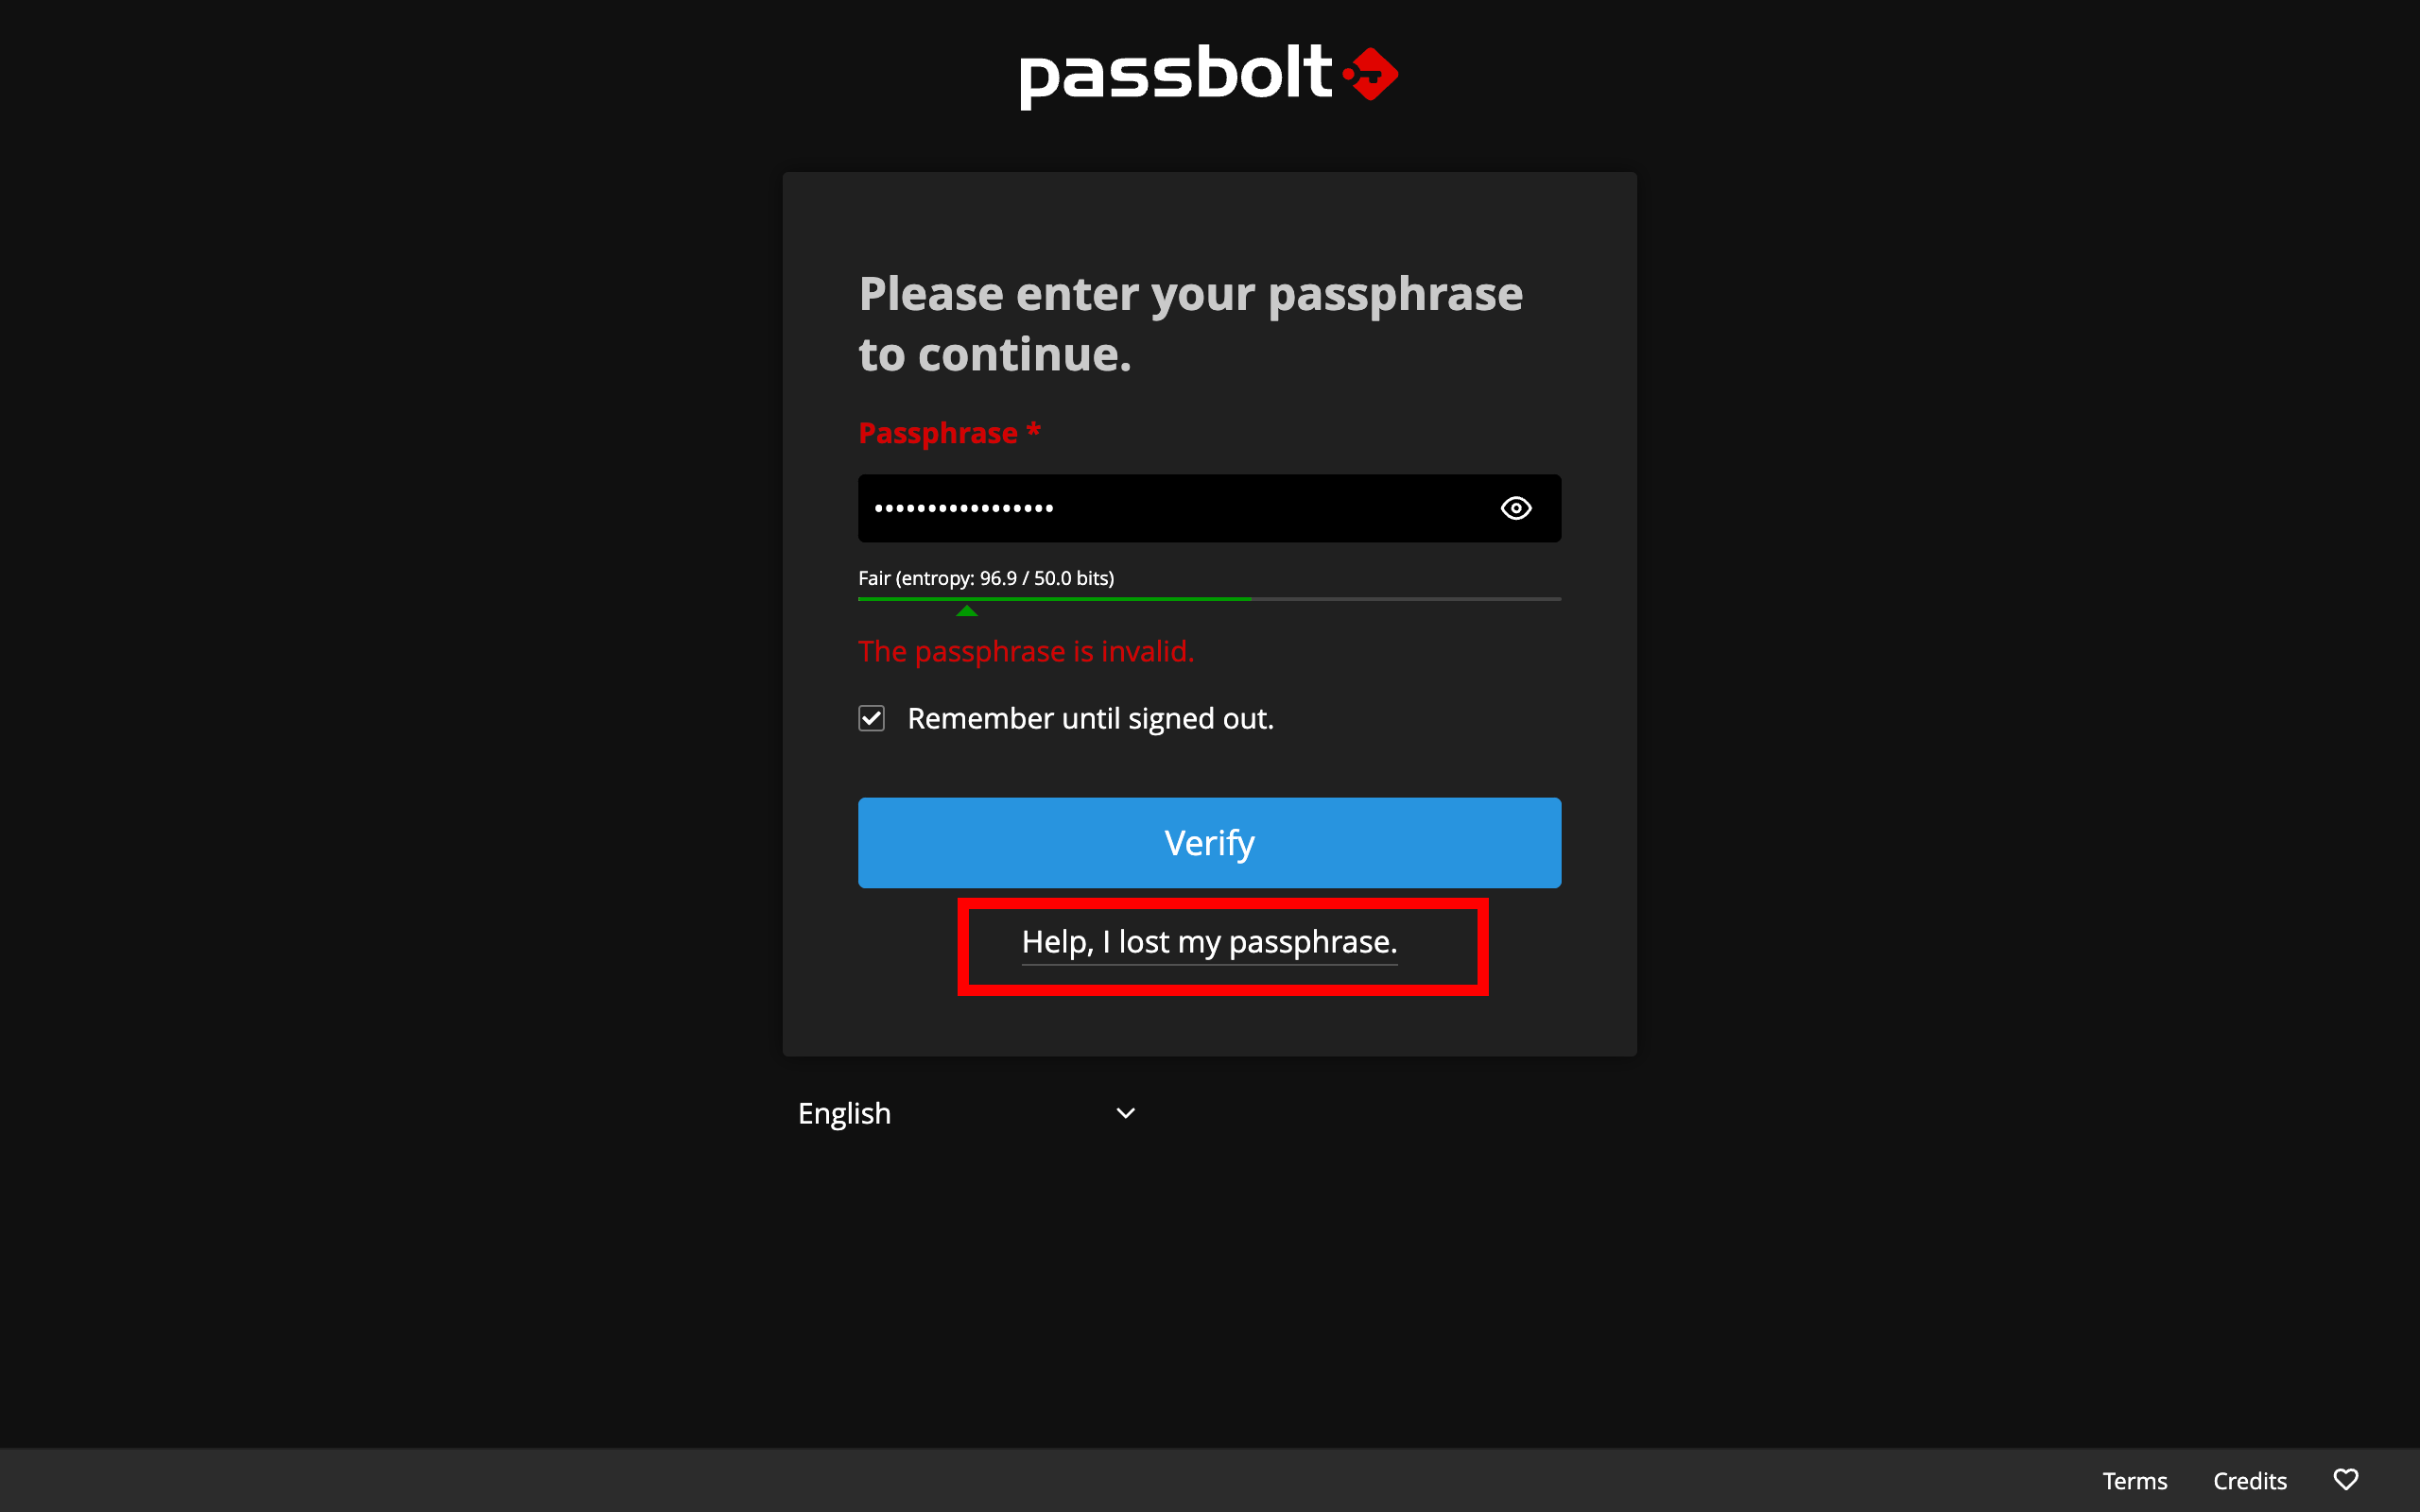 Setup on a new device with lost passphrase